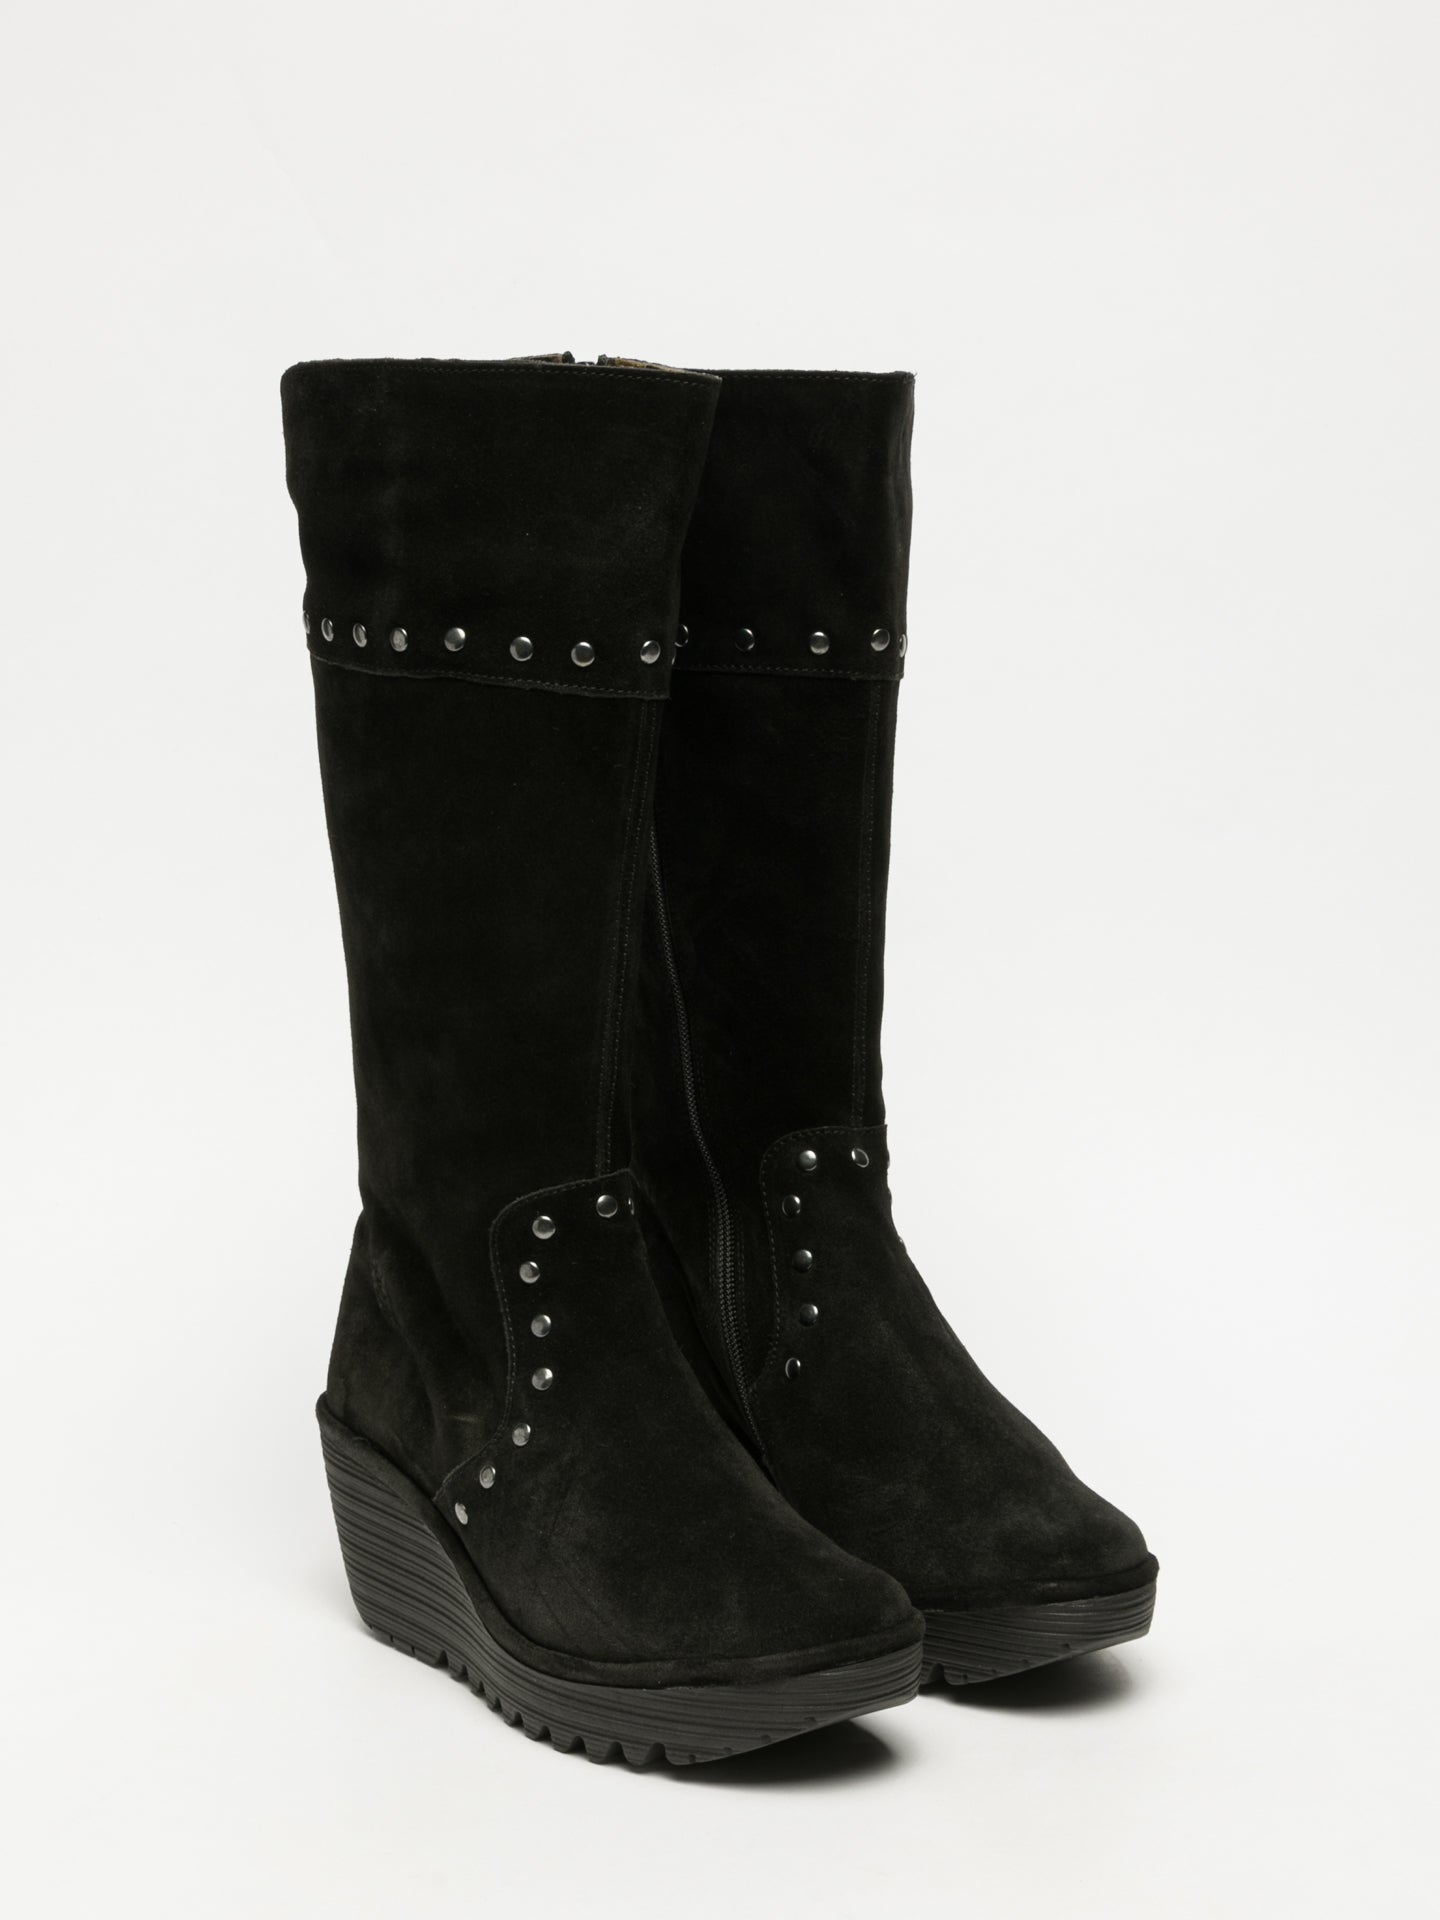 Fly London Black Studded Boots